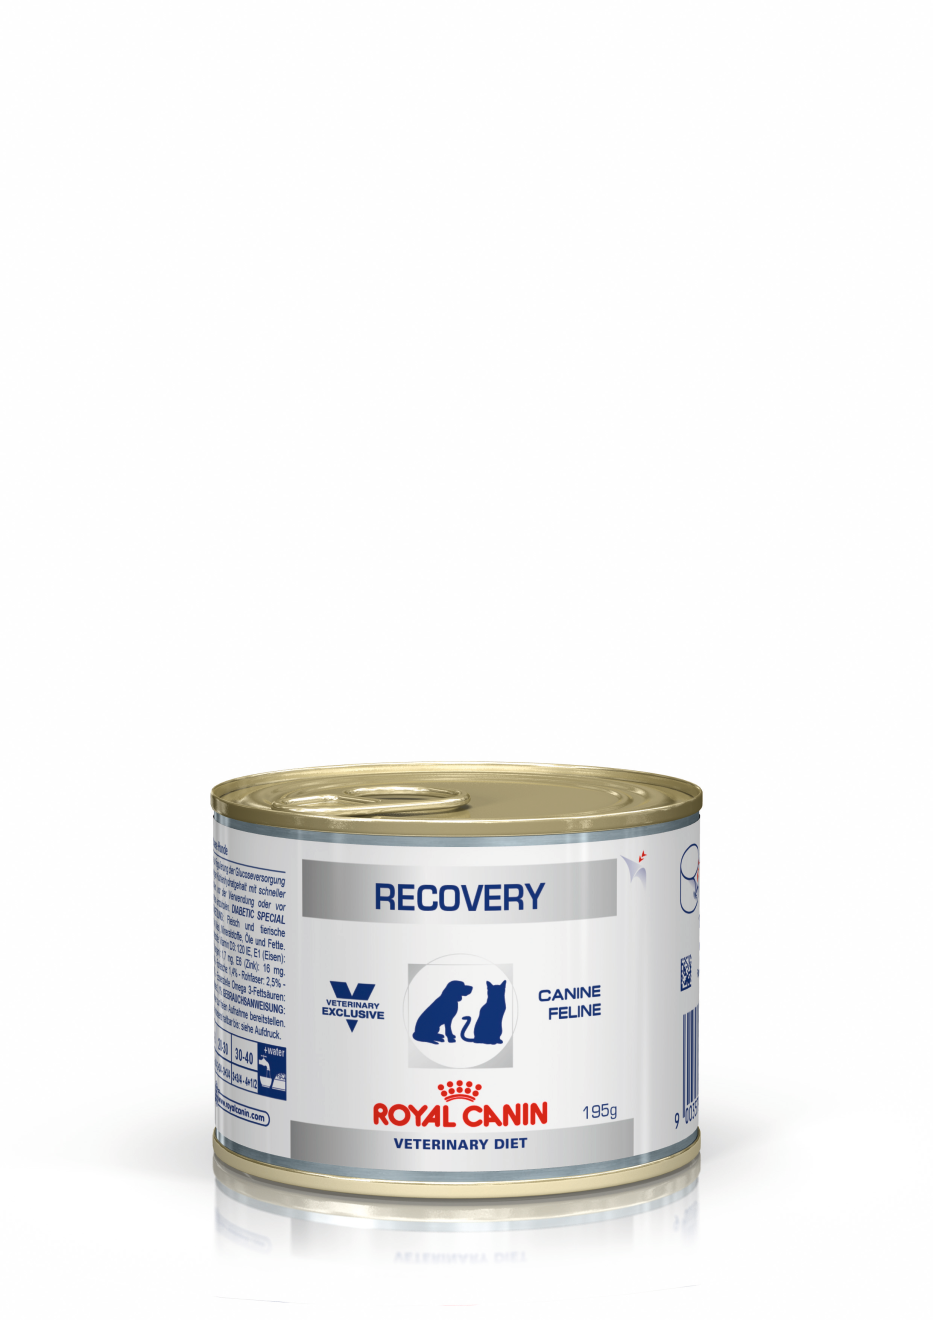  Royal Canin Recovery Can Pet Food 24pk